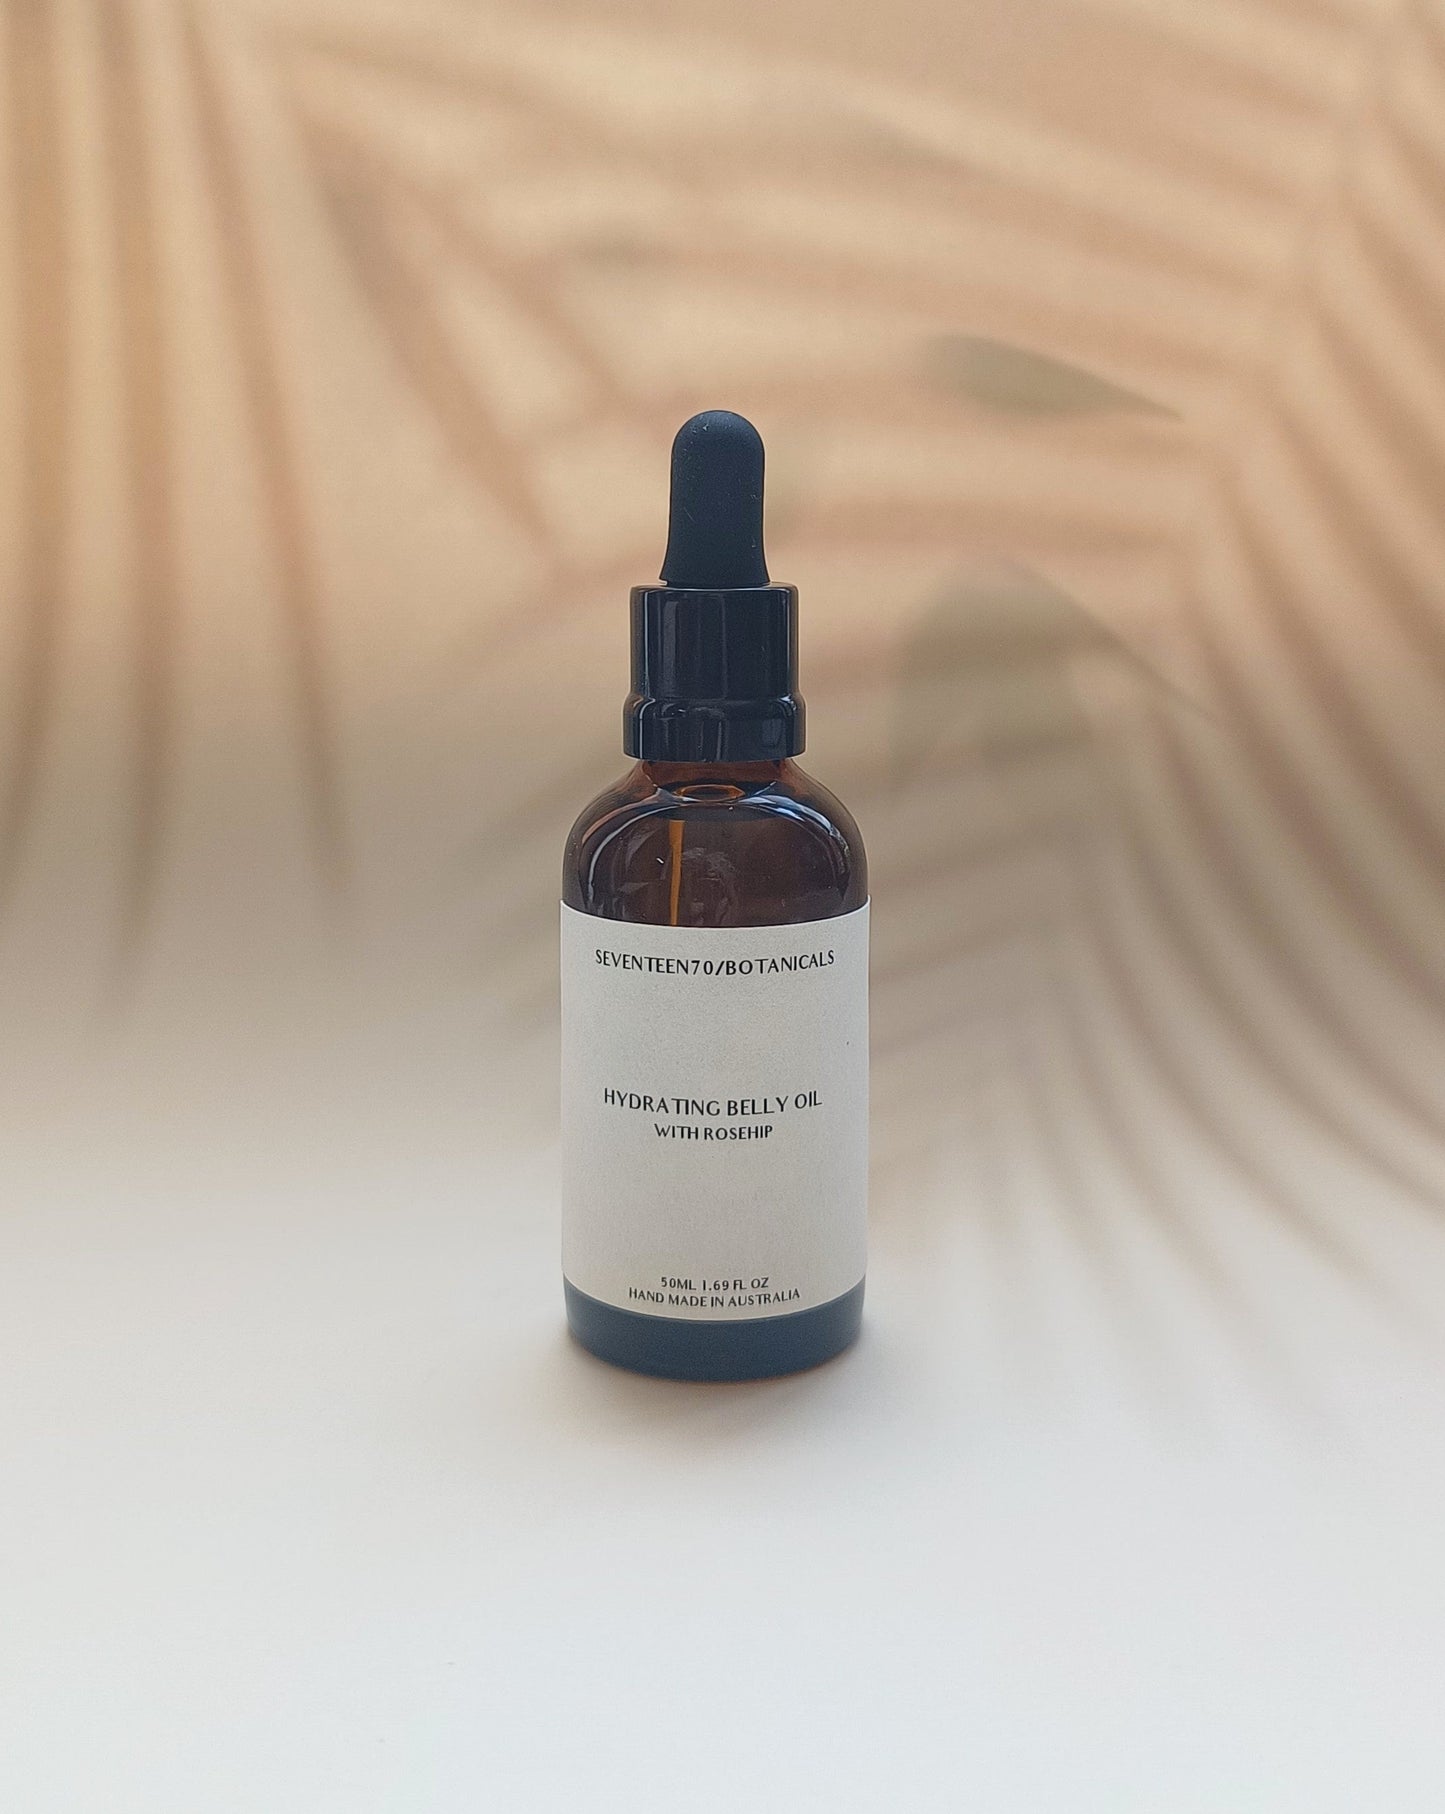 Hydrating Belly Oil with Rosehip